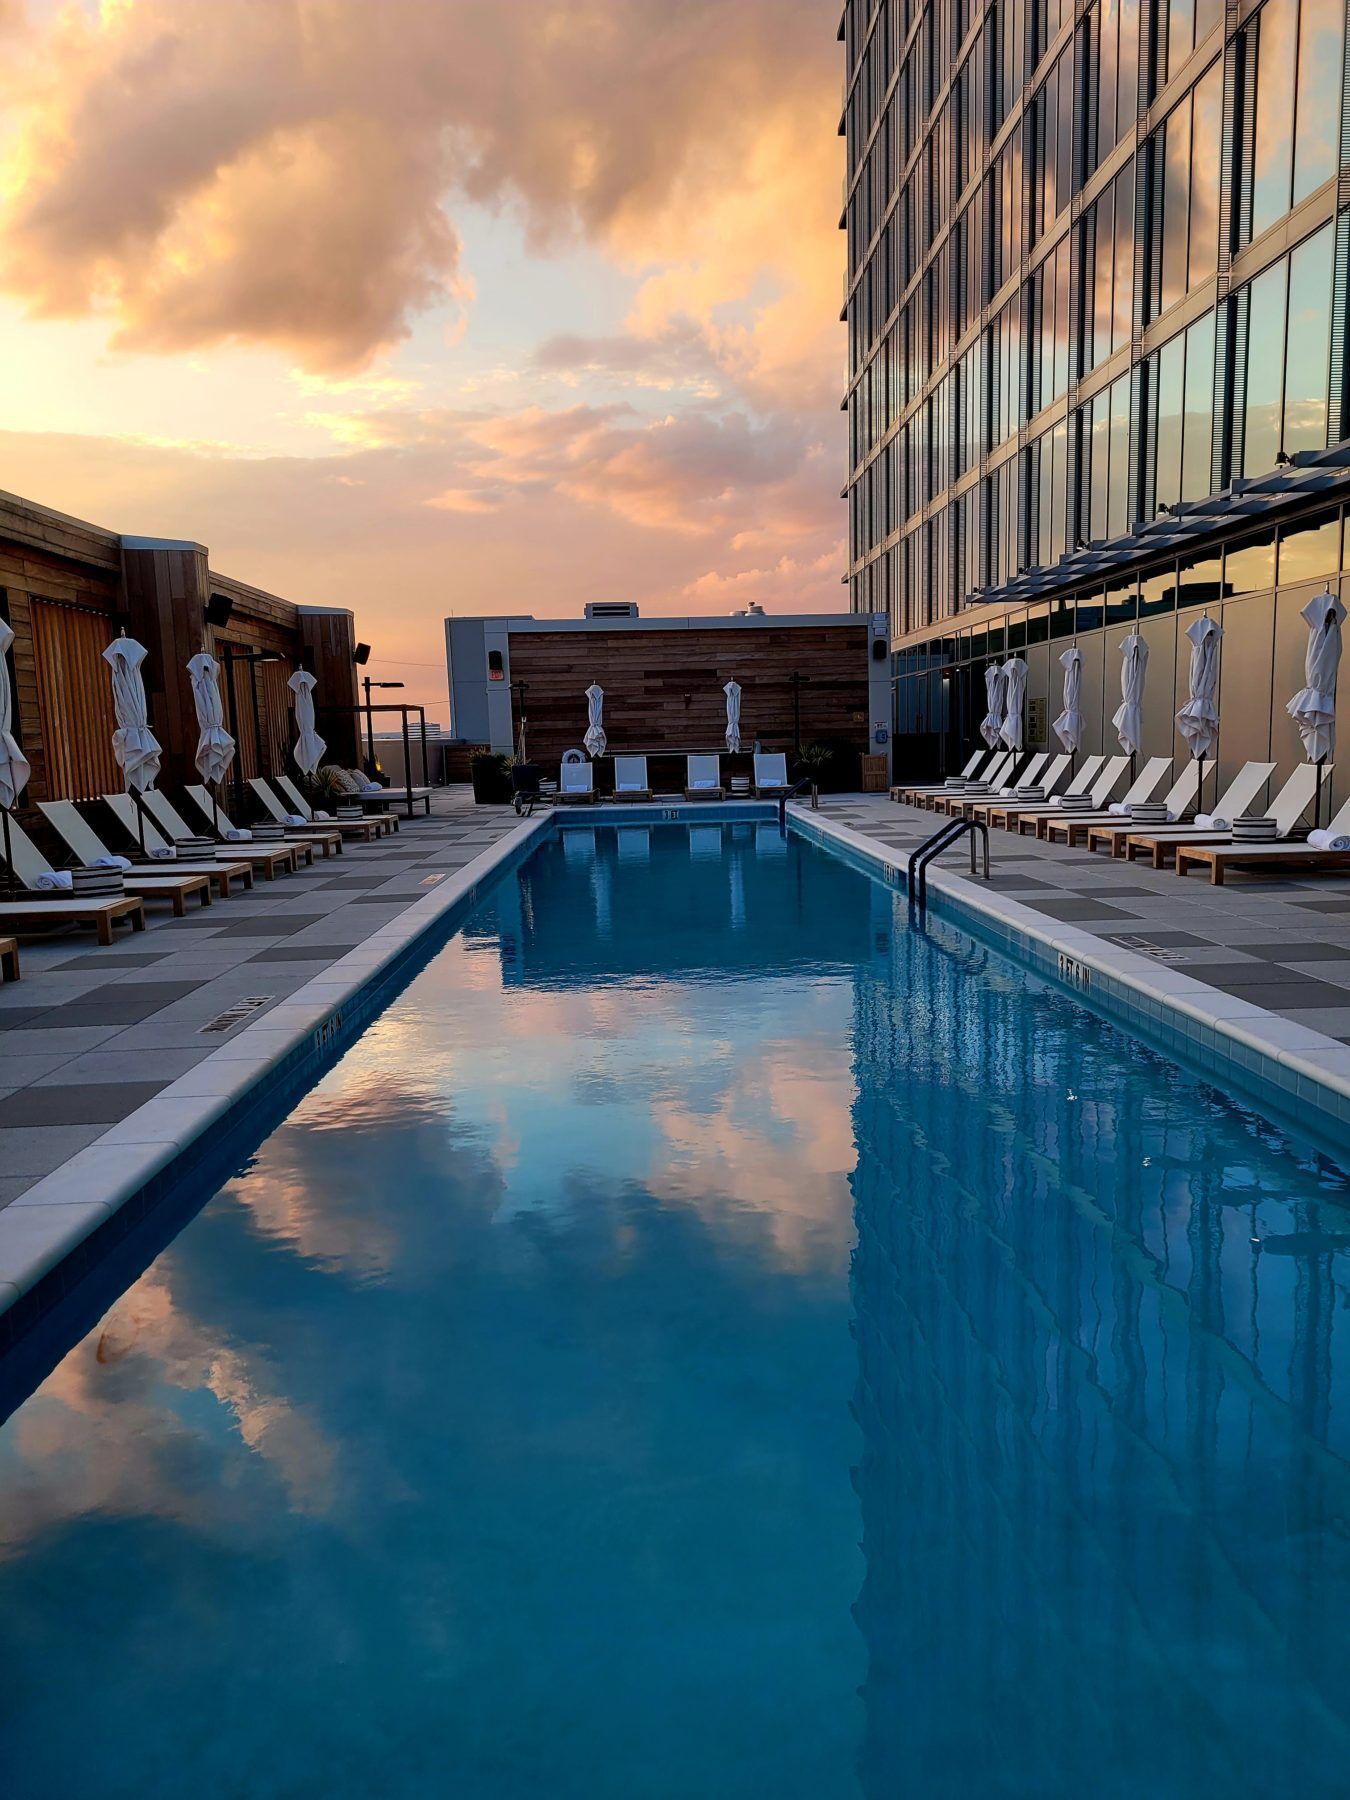 Make a splash in The Conrad's rooftop outdoor pool, an urban oasis offering breathtaking city views. Unlike other hotels, Conrad Nashville provides complimentary cabanas, ensuring a touch of exclusivity and relaxation. The pool deck is impeccably clean, with attentive staff ready to cater to your every need.